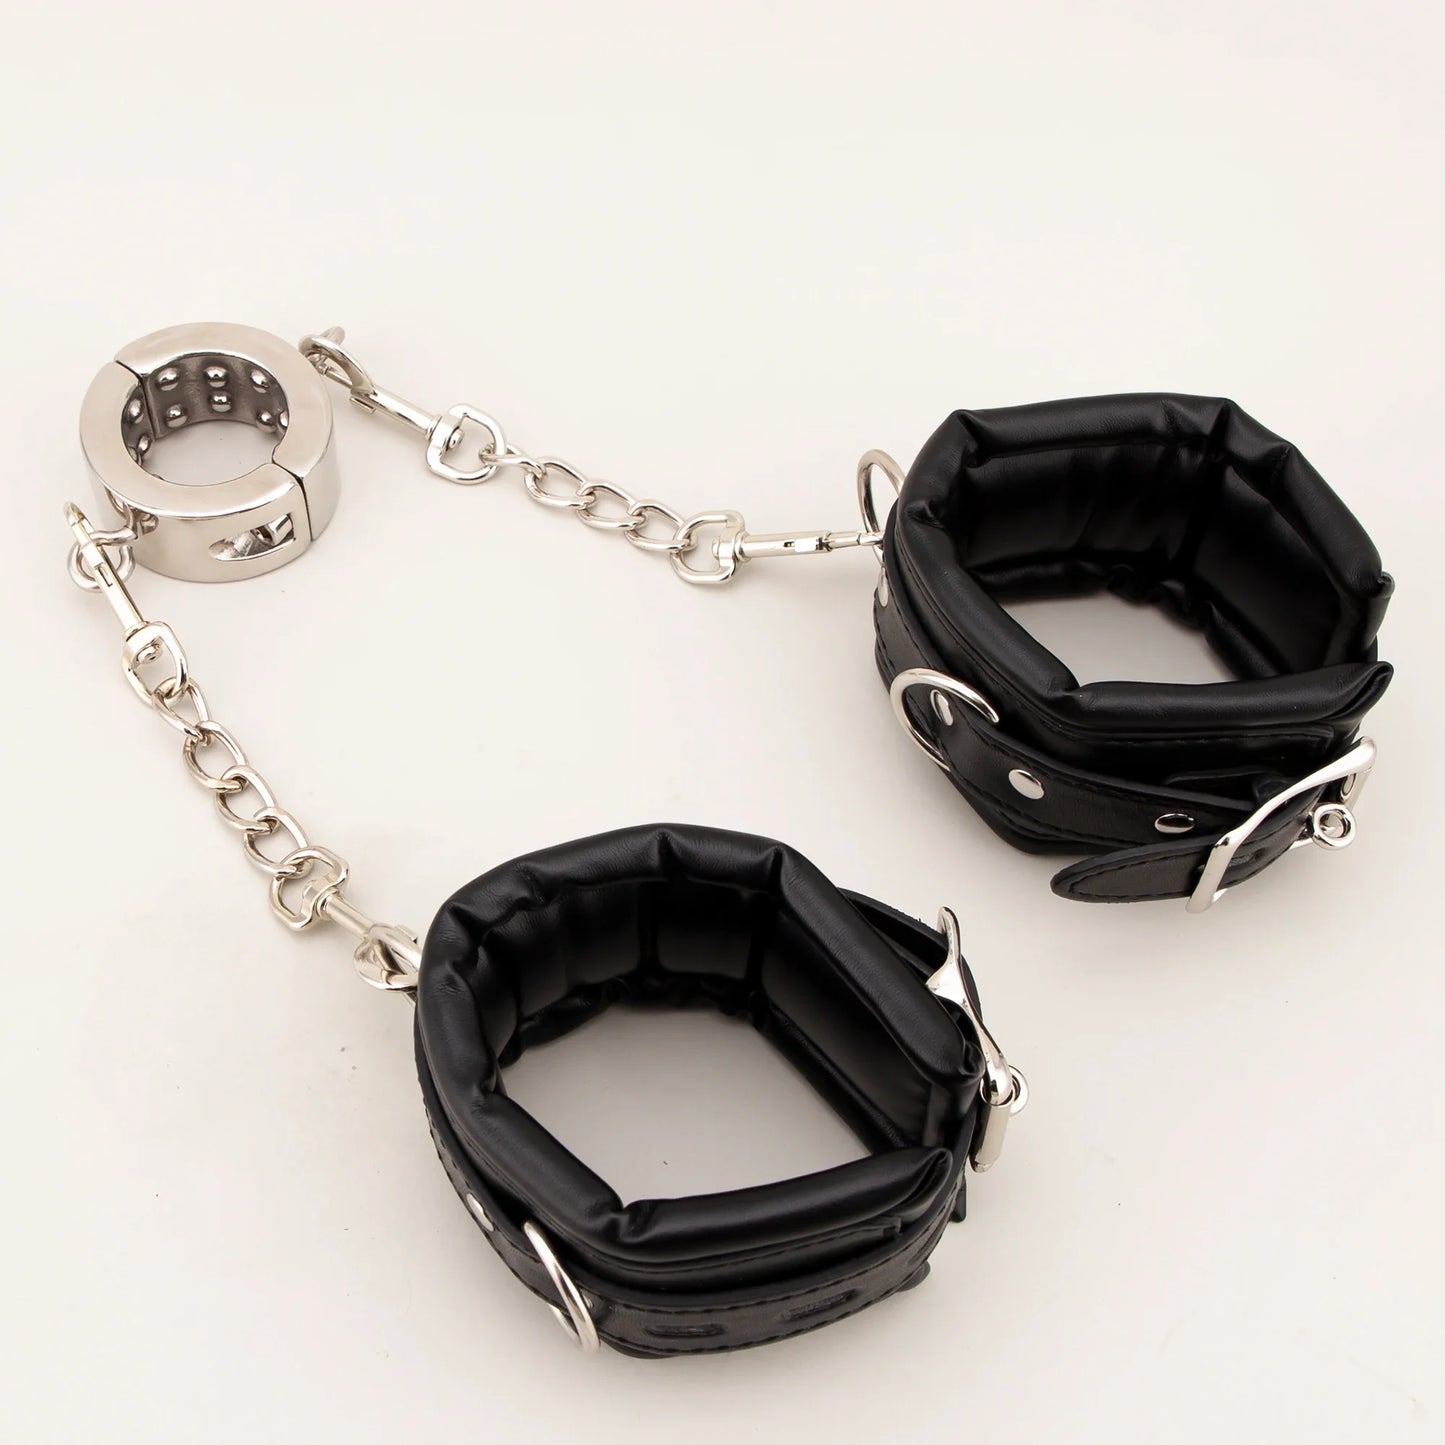 Steel Scrotum Restraint with Attached Hand or Ankle Cuffs